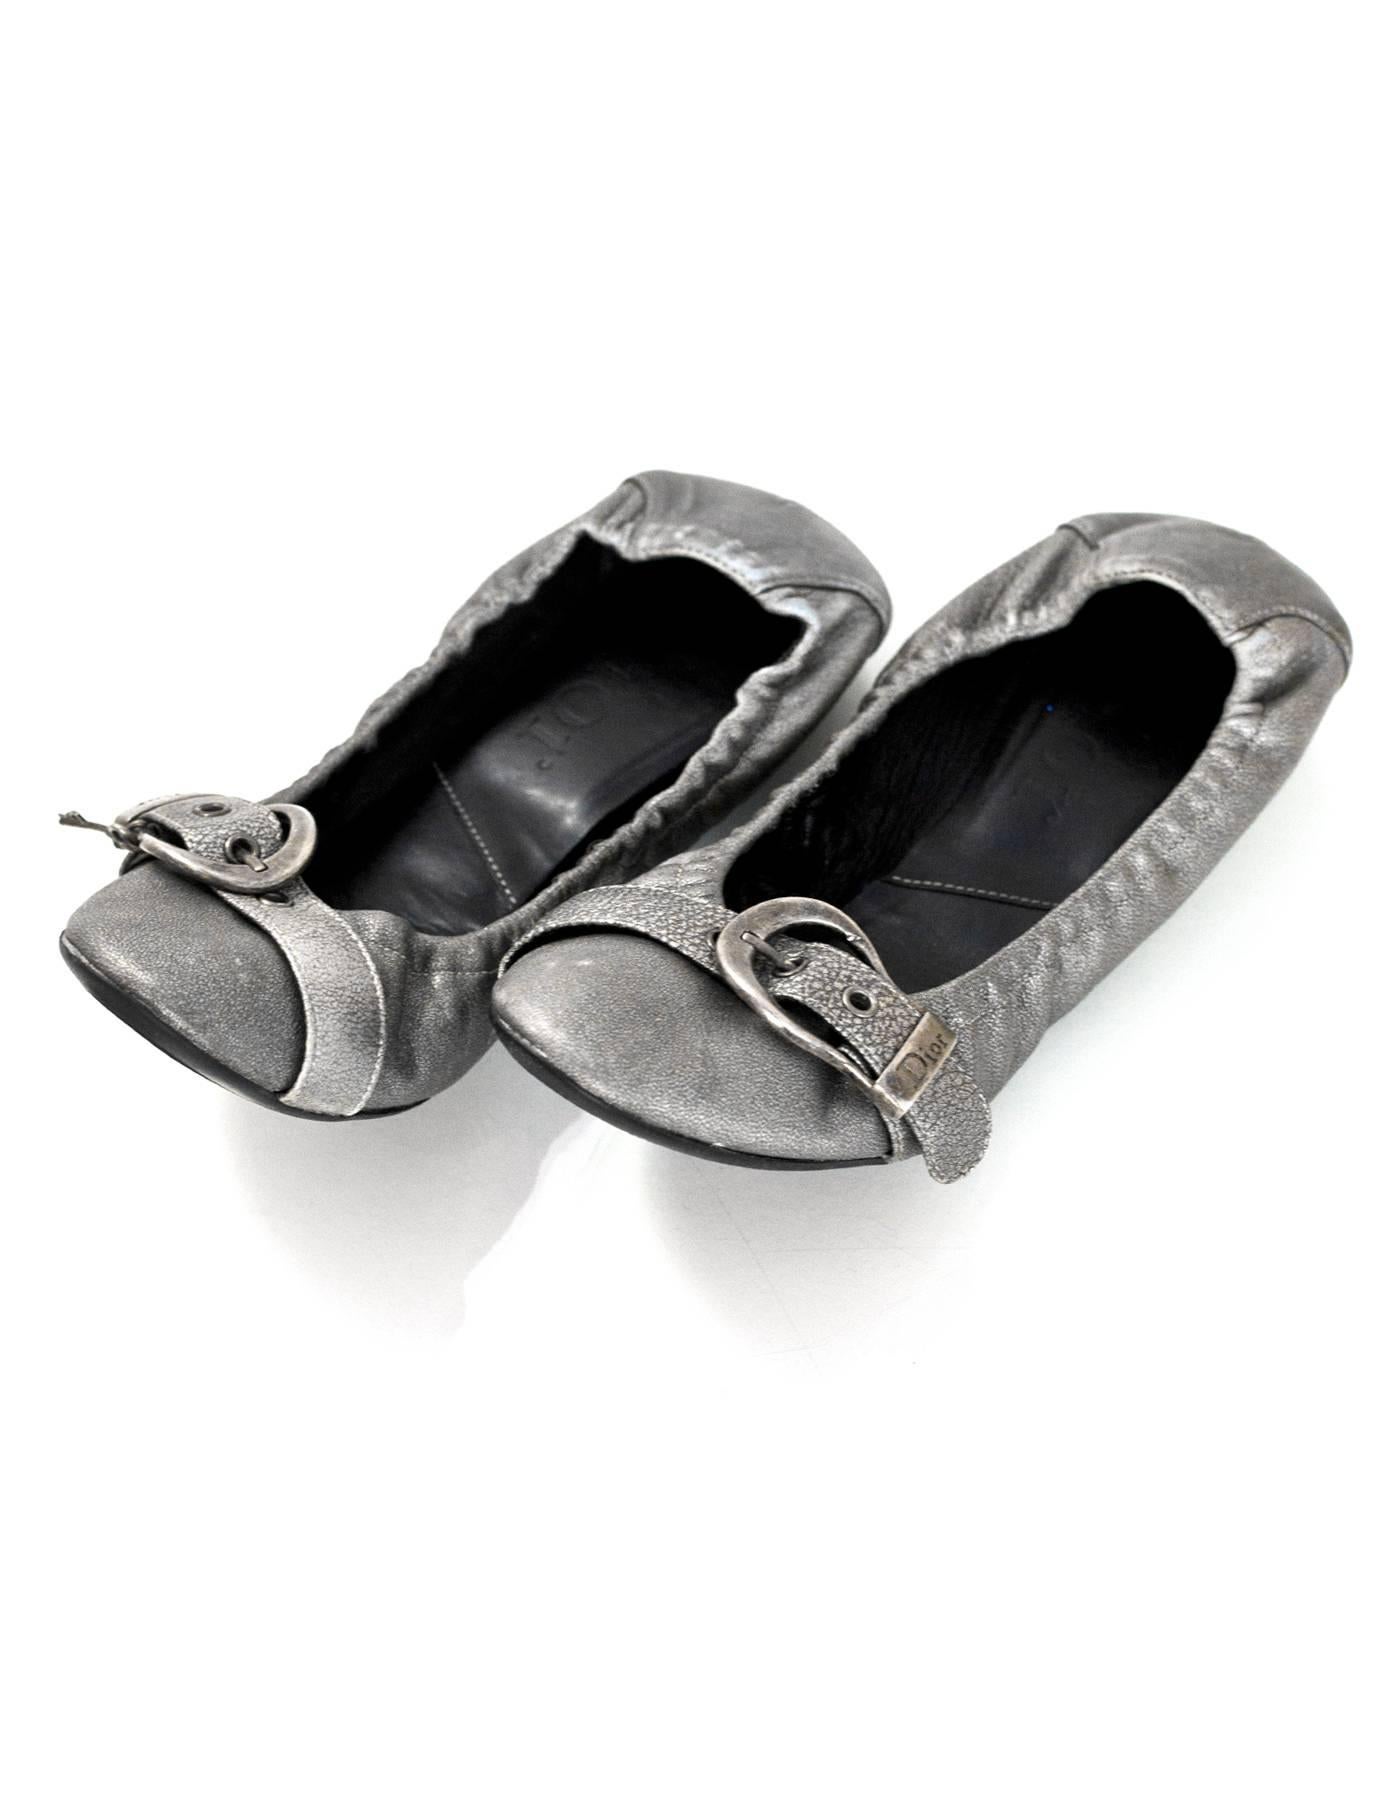 Christian Dior Silver Leather Stretch Flats Sz 37

Color: Silver
Materials: Leather
Closure/Opening: Slide on
Sole Stamp: Dior
Overall Condition: Excellent pre-owned condition with very light wear at out soles and insoles, some marks at heels and